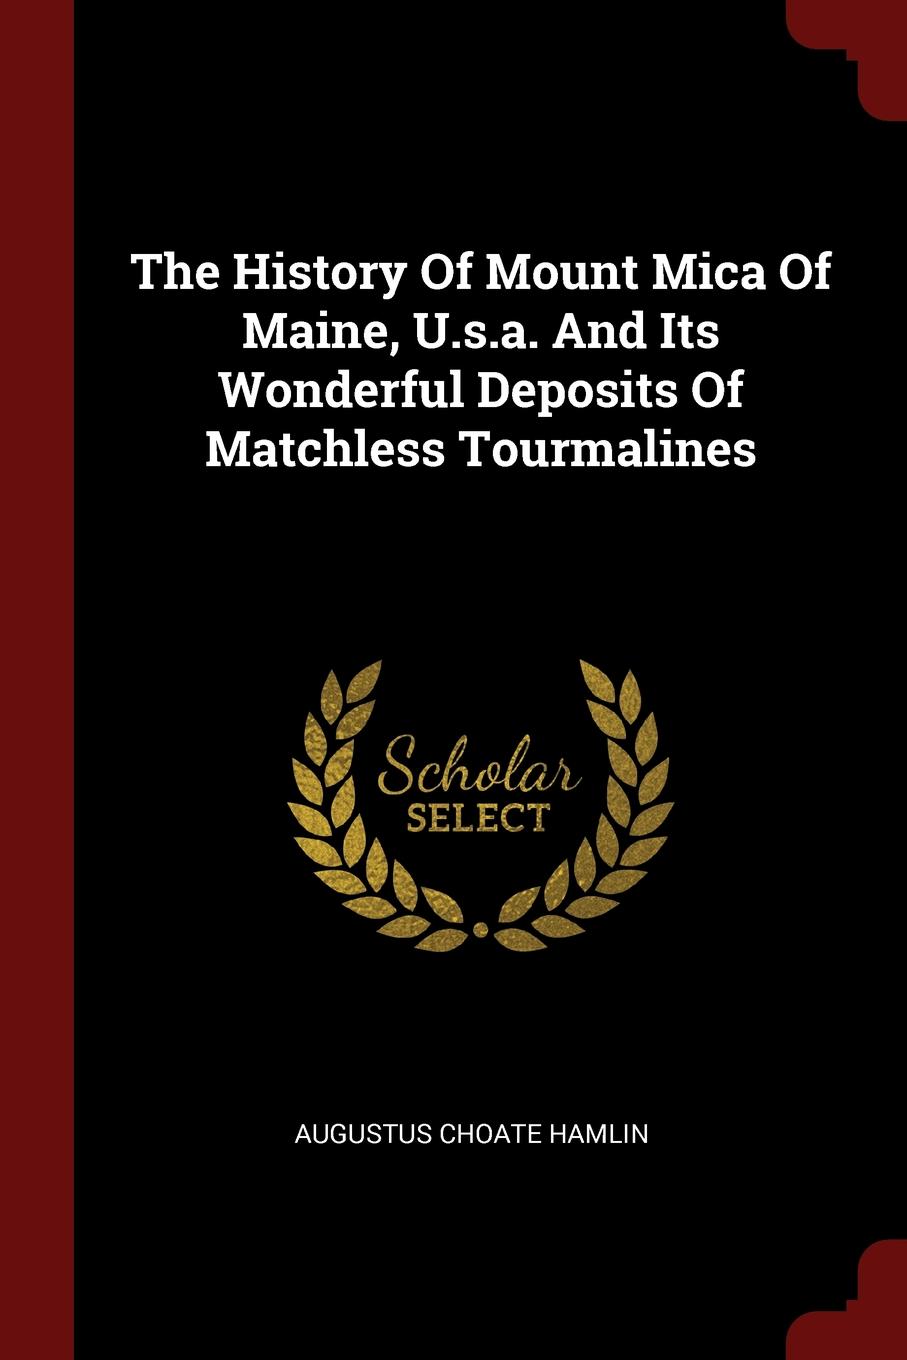 The History Of Mount Mica Of Maine, U.s.a. And Its Wonderful Deposits Of Matchless Tourmalines